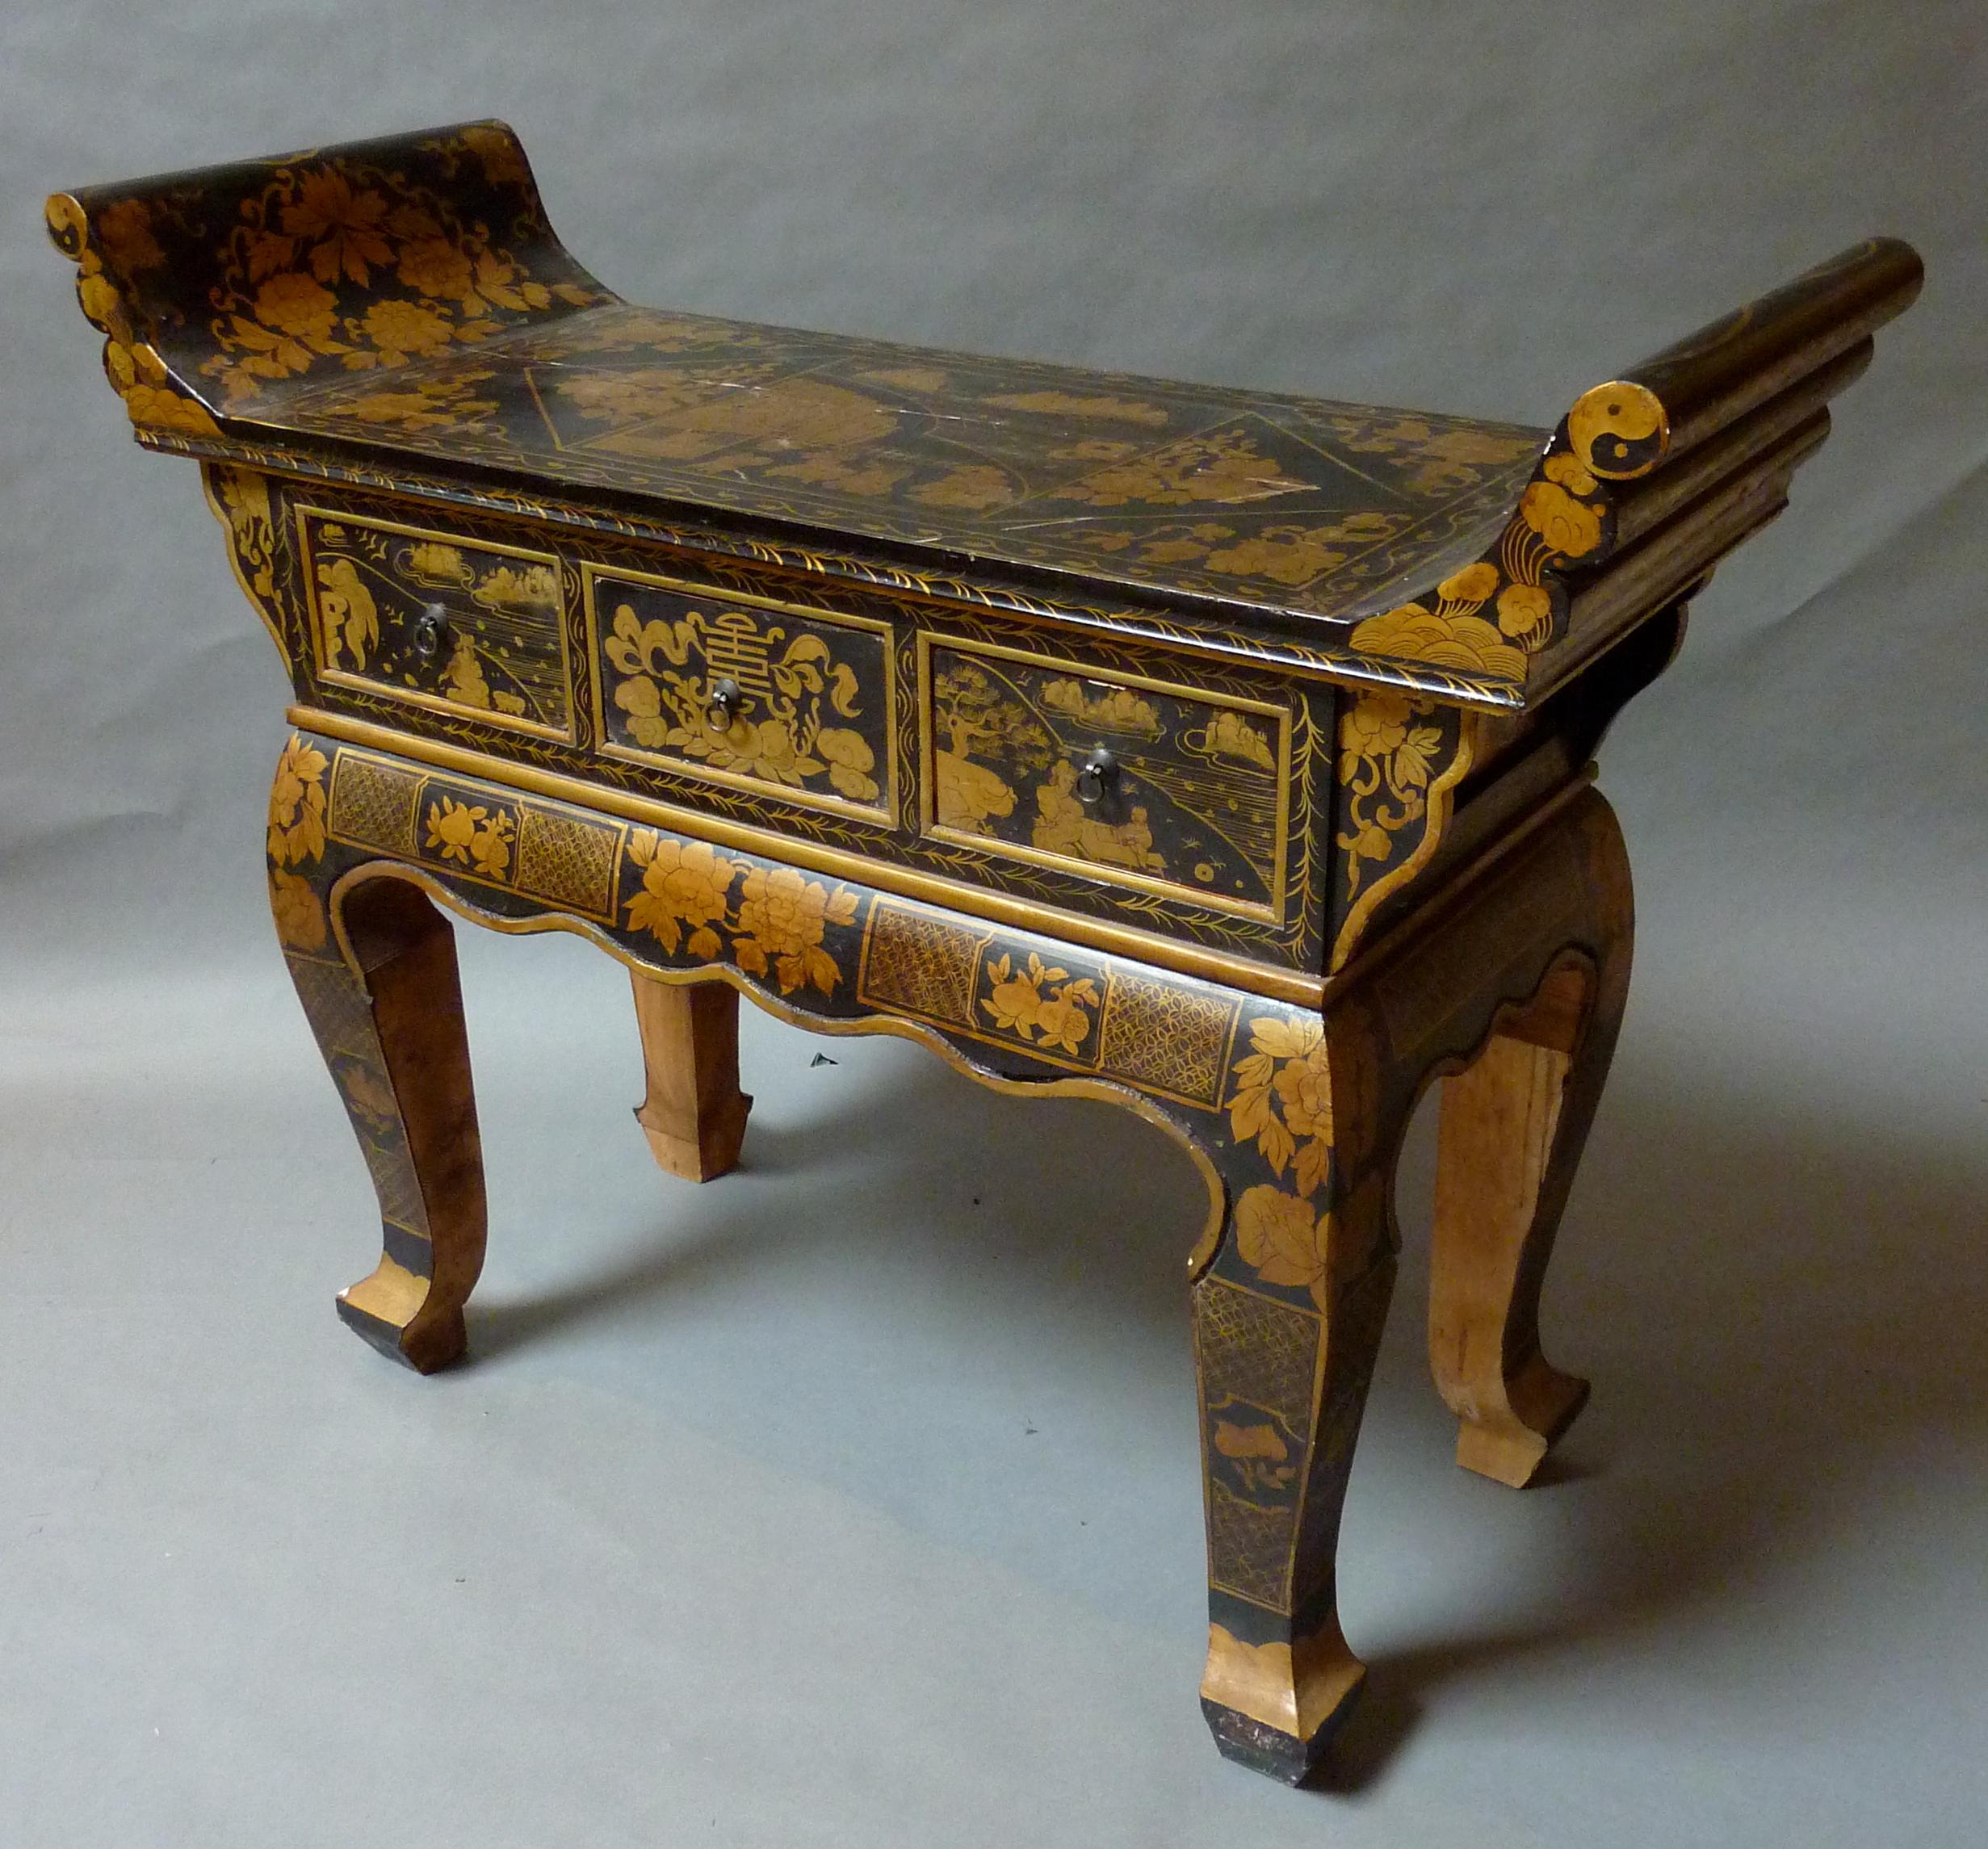 Early 20th century Tibetan altar table. Made in the antique style with black lacquer and intricate gilt floral decoration, shaped top above three drawers over scalloped apron and boldly shaped cabriole legs. 
Tibet, circa 1900.
Measures: 38” H 49” W